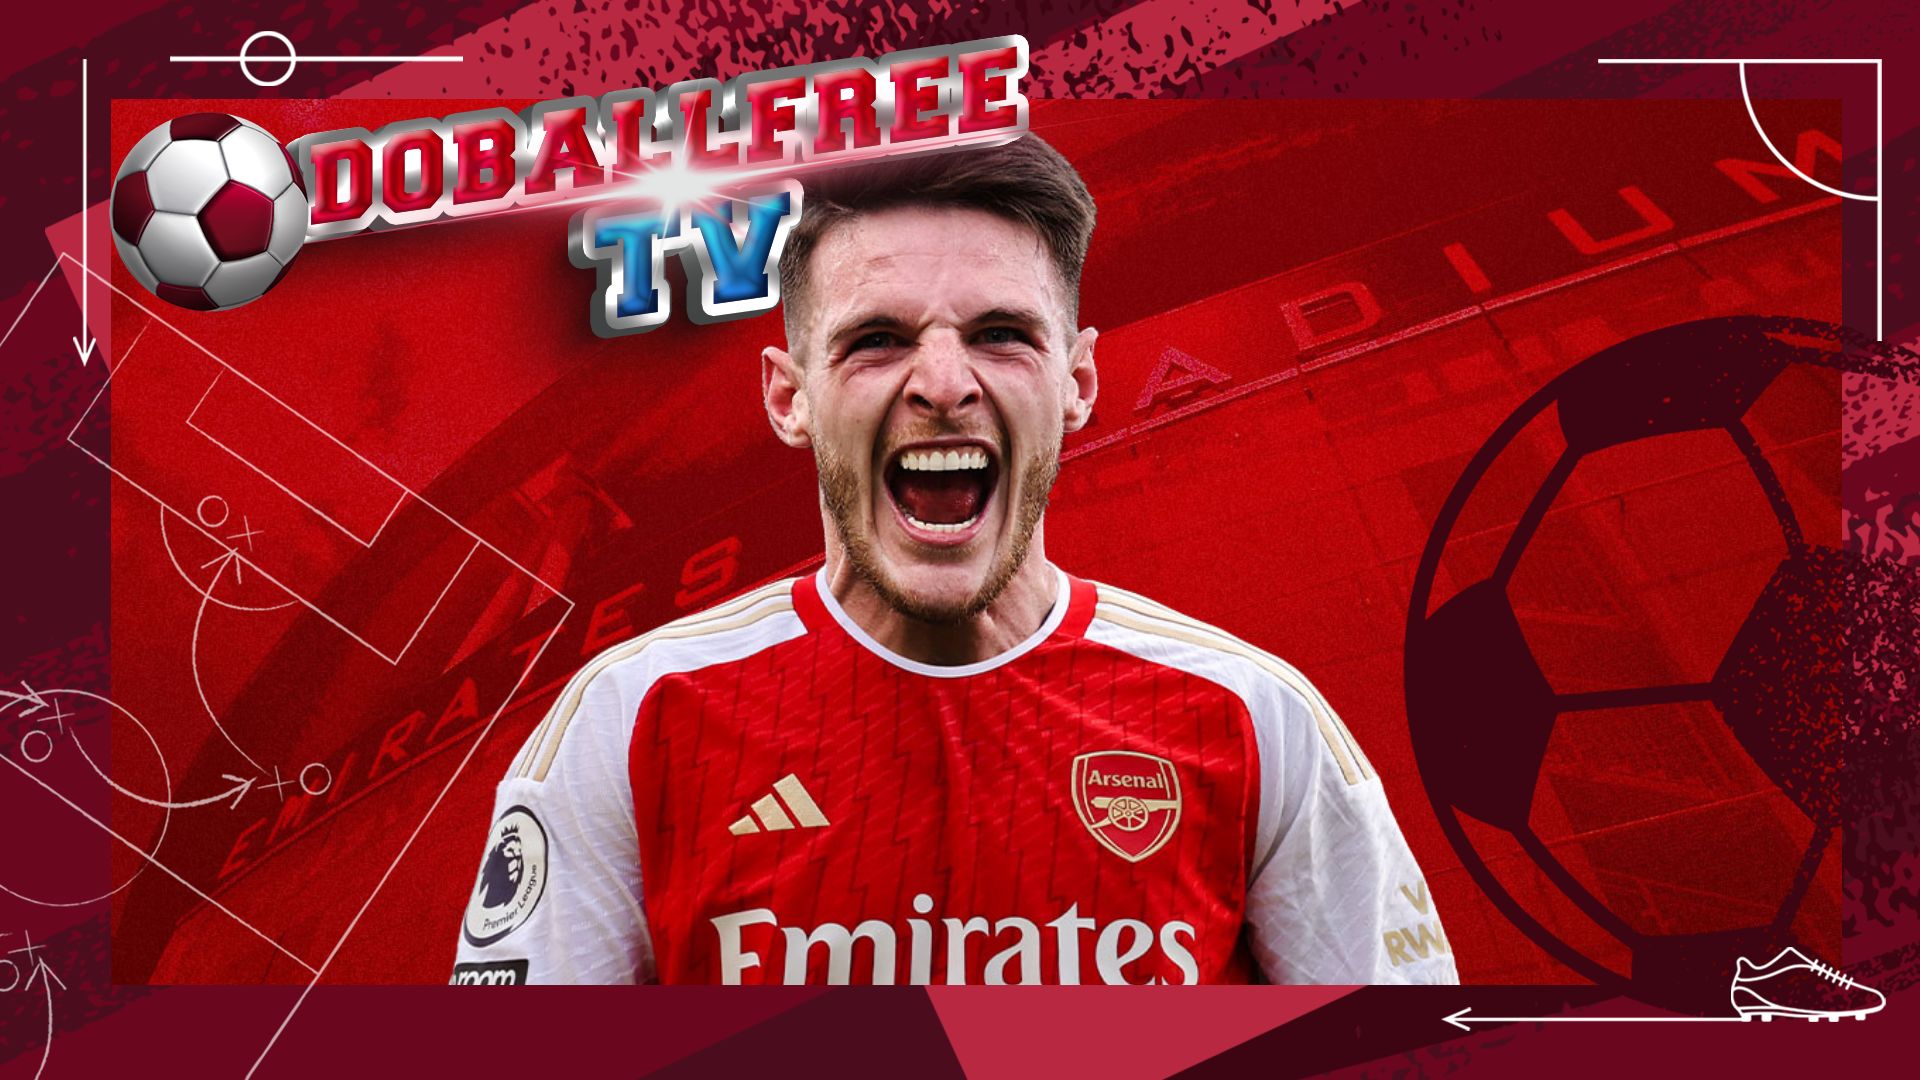 Declan Rice set to make his official debut with Arsenal